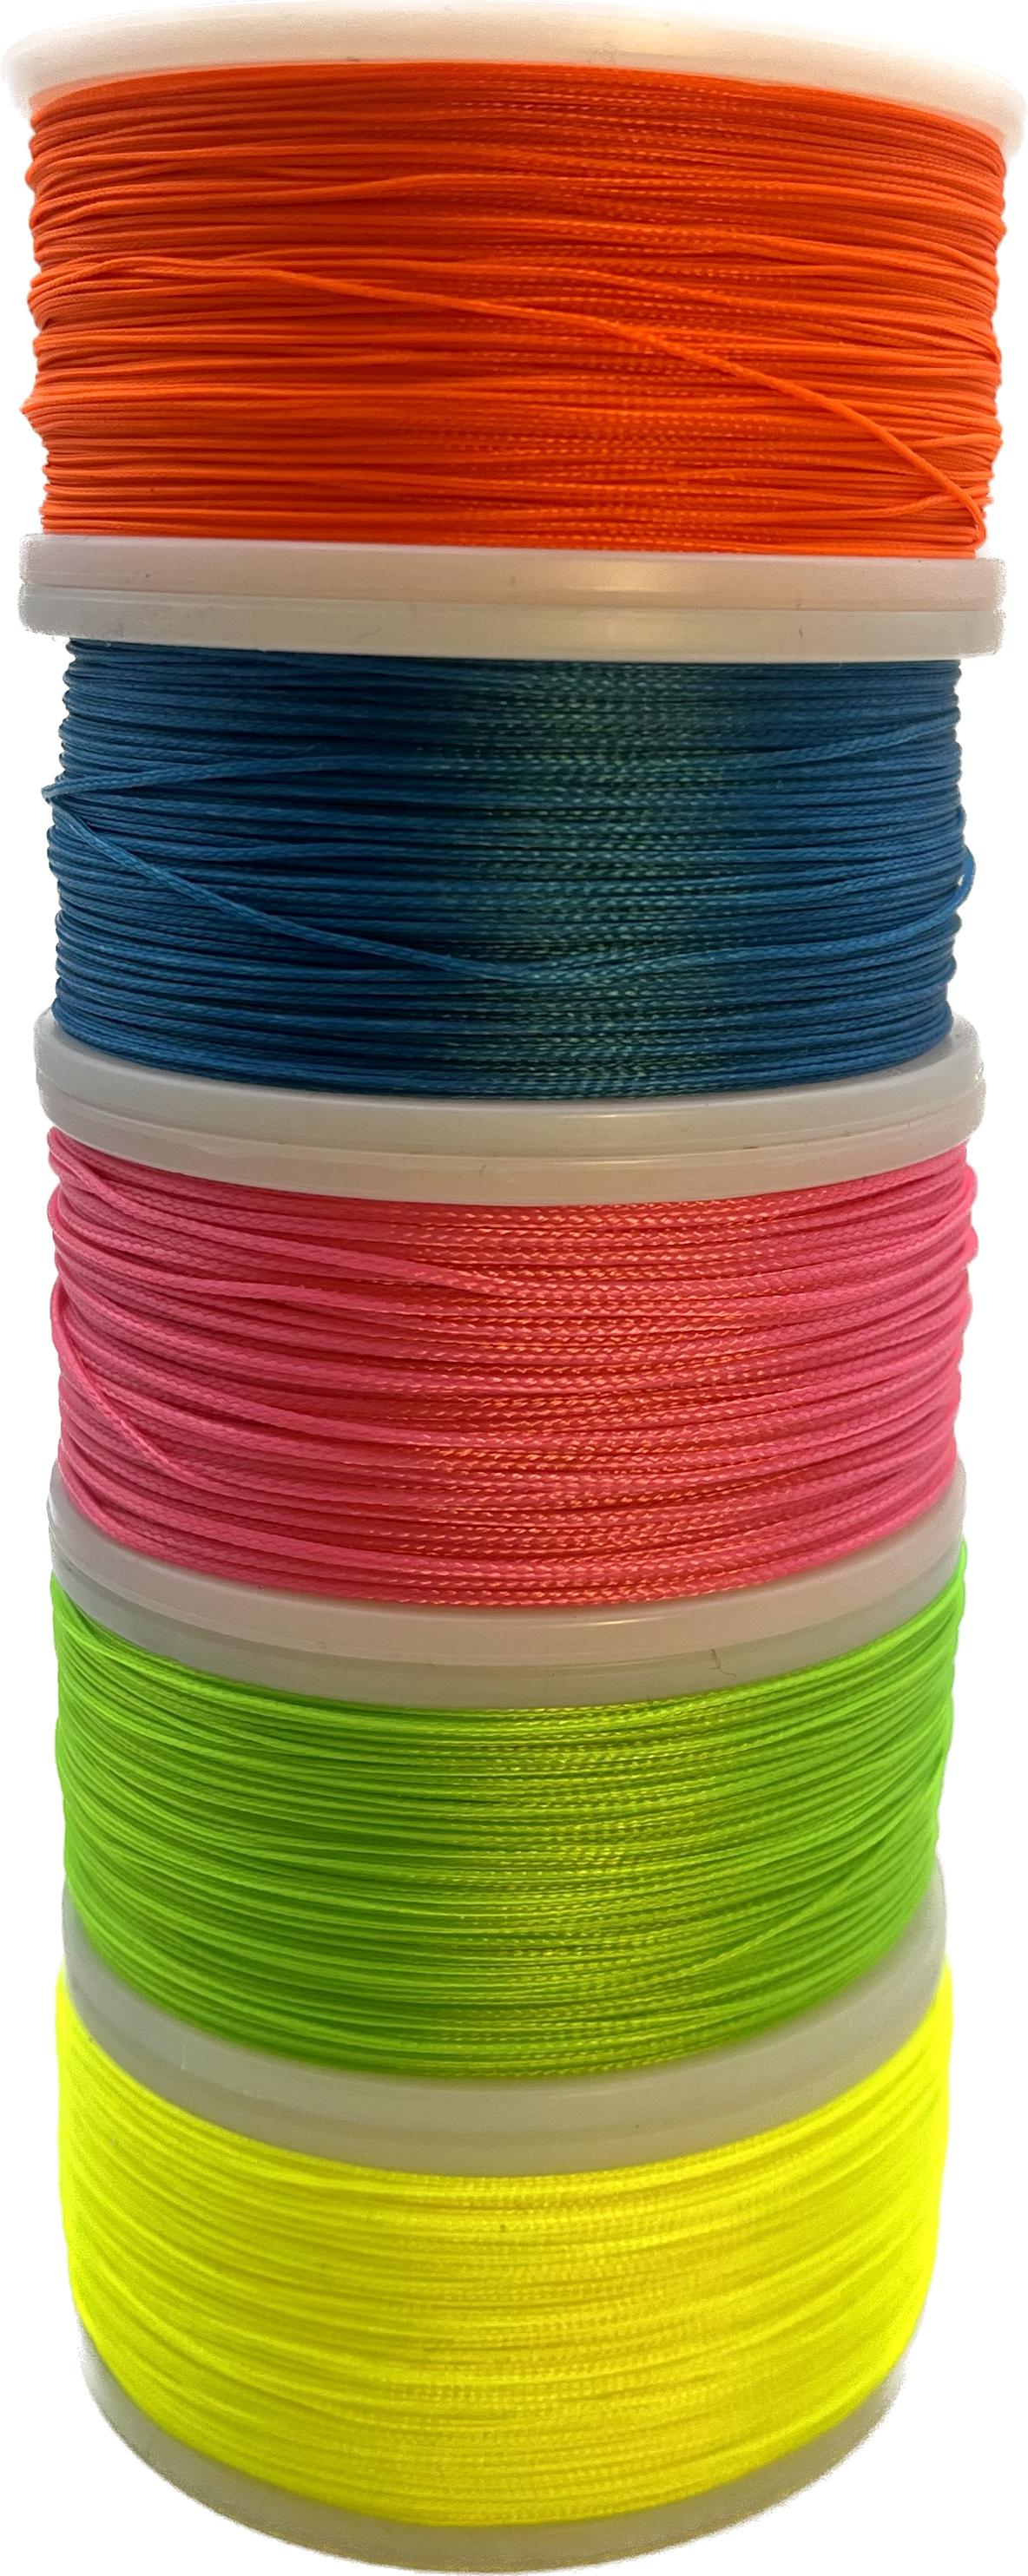 WOODSTOCK ICE FISHING TIP-UP LINE 18# TEST 150YD SPOOL SAND COLOR